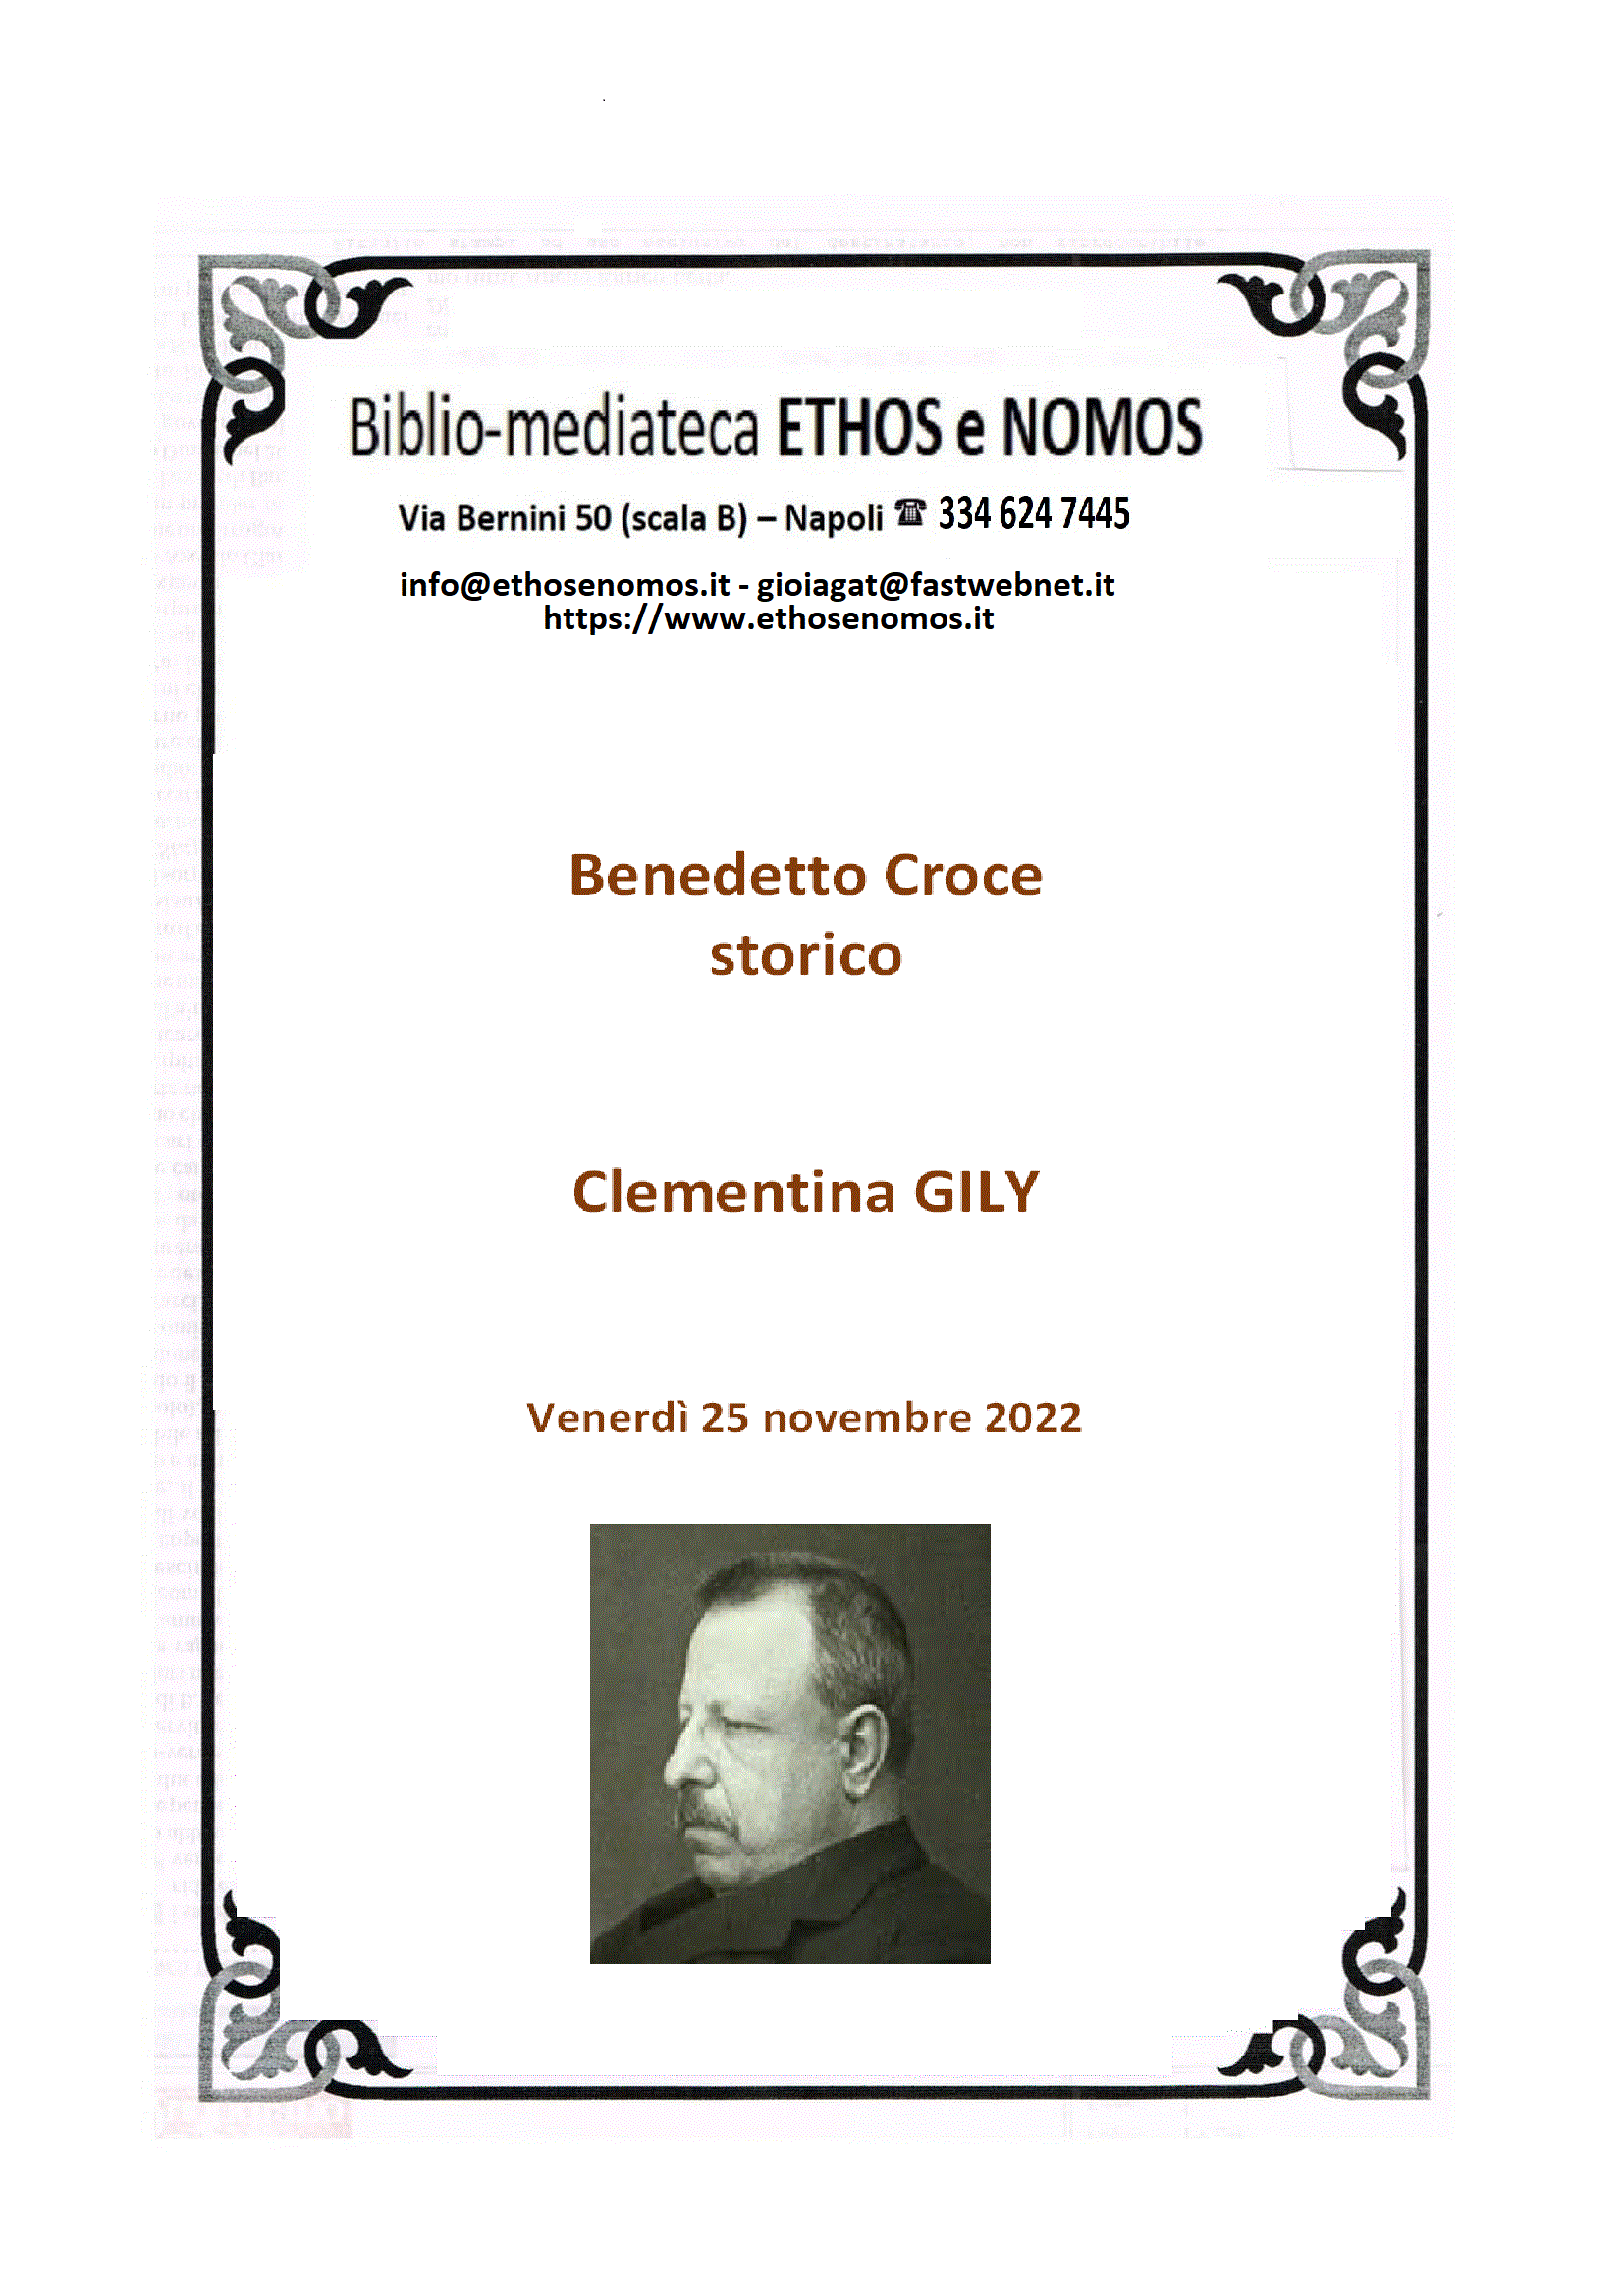 Clementina GILY - Benedetto Croce storico